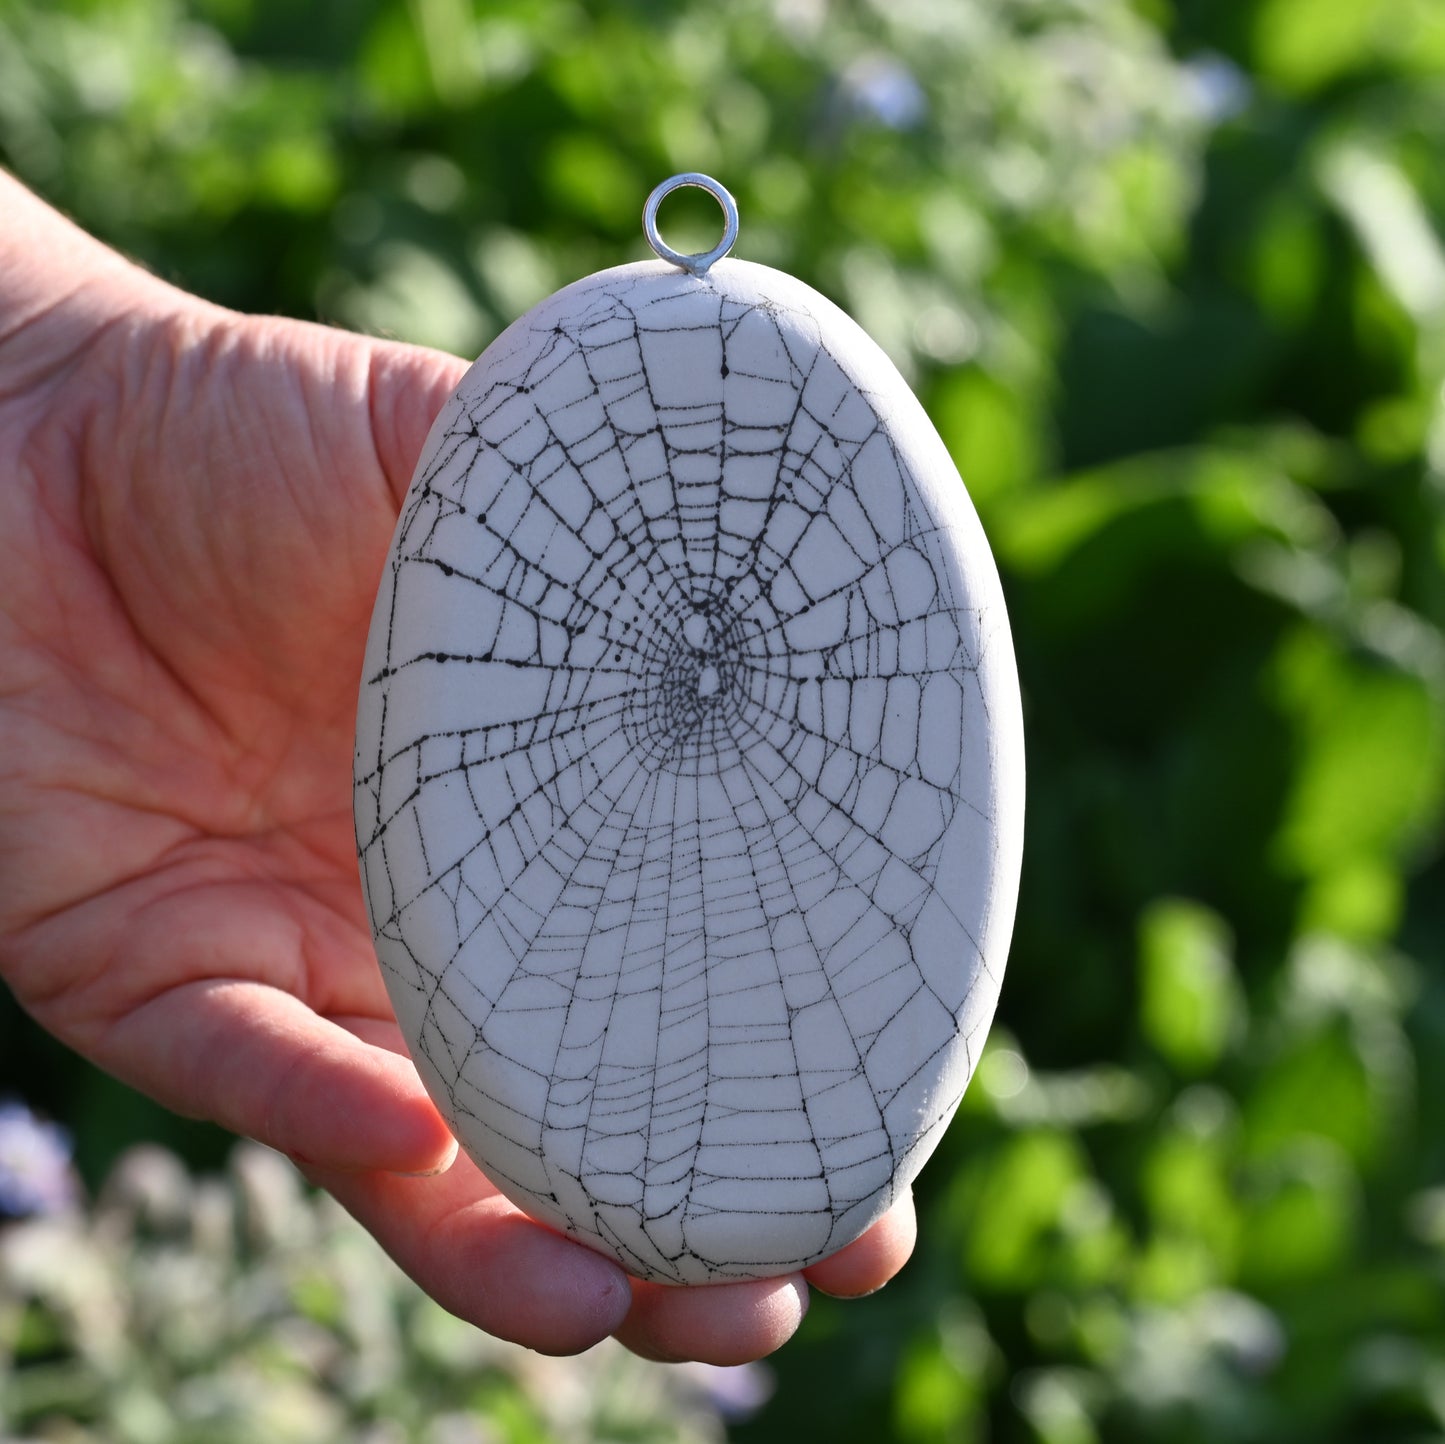 Web on Clay (155), Collected August 31, 2022